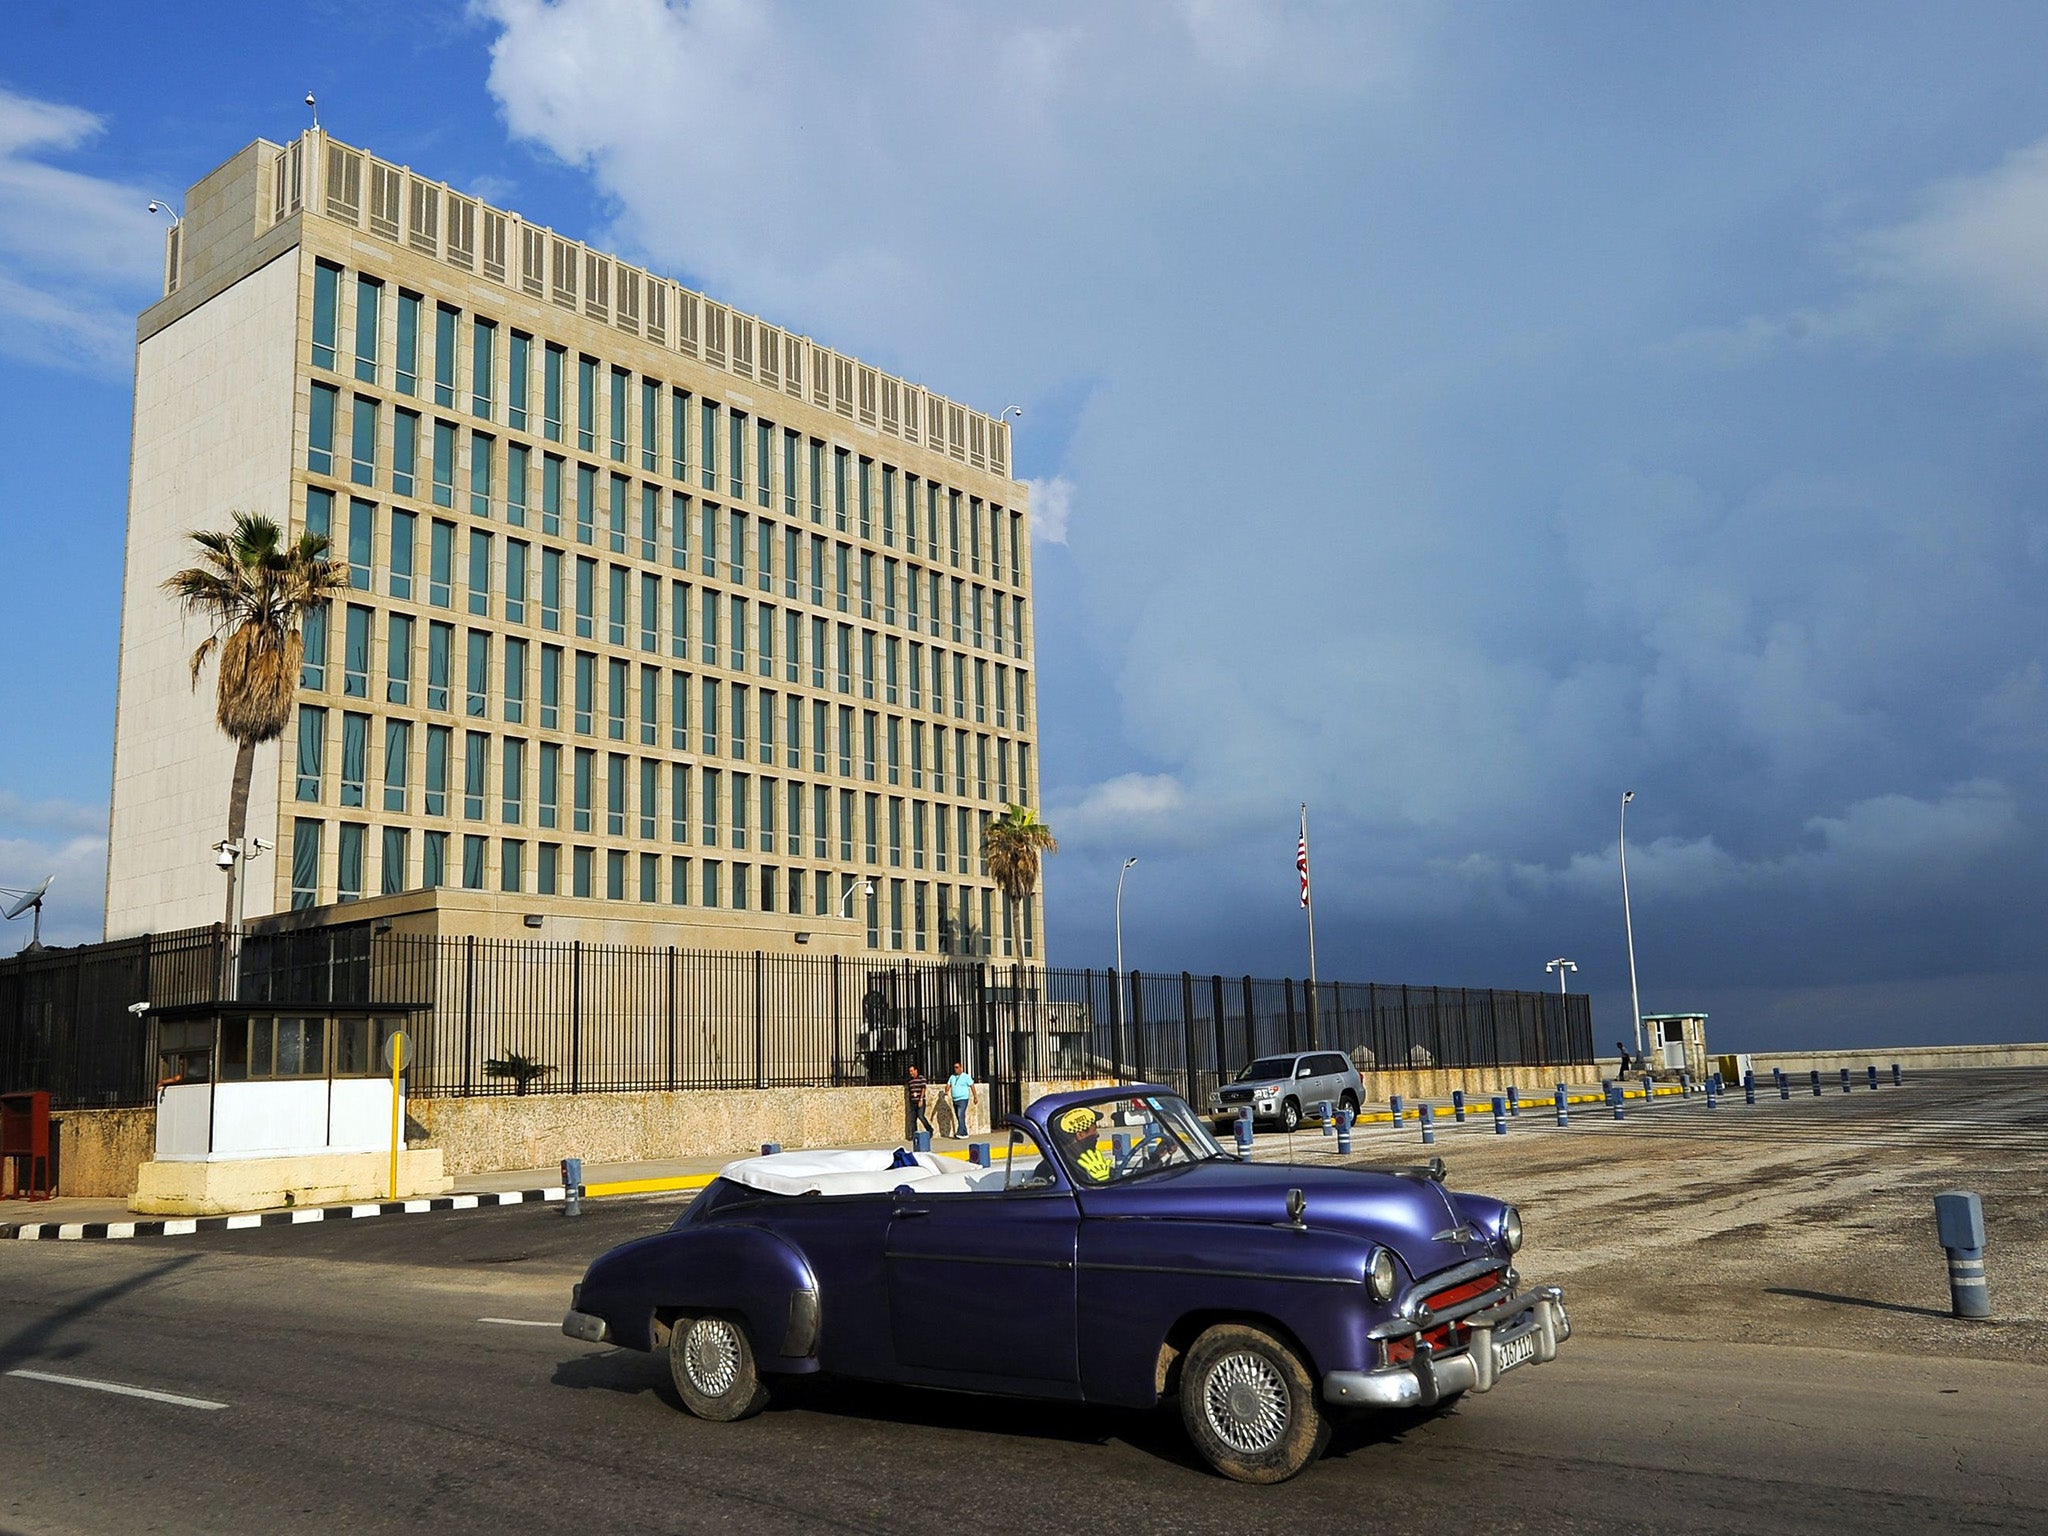 Noise saw staff at the US embassy in Havana complain of headaches, nausea and hearing loss